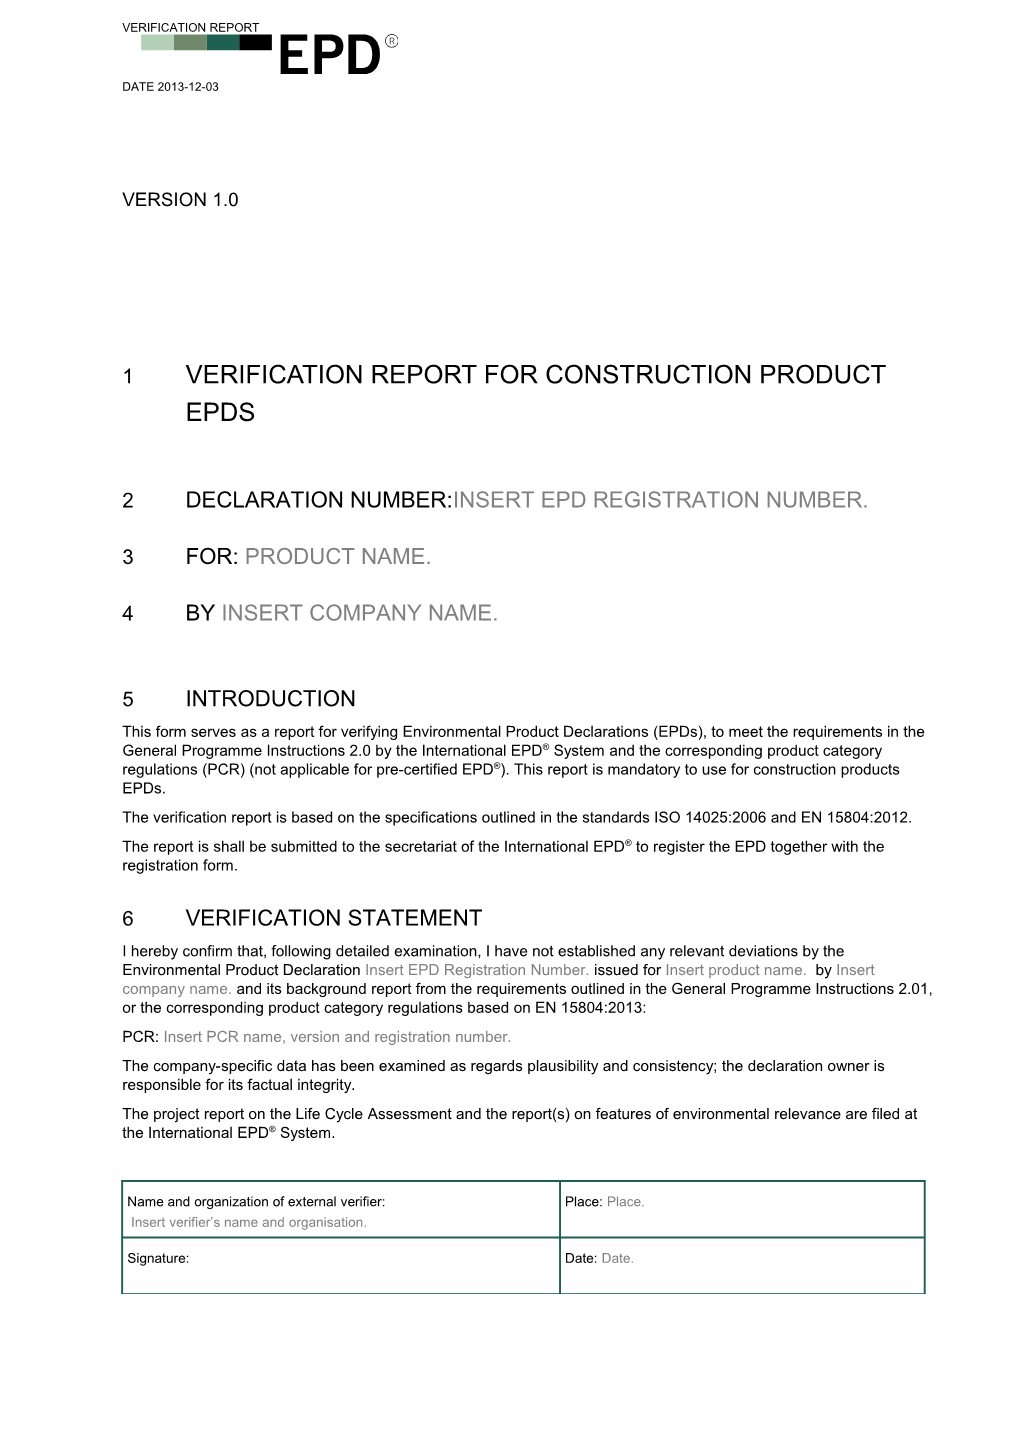 VERIFICATION REPORT for Construction Product Epds